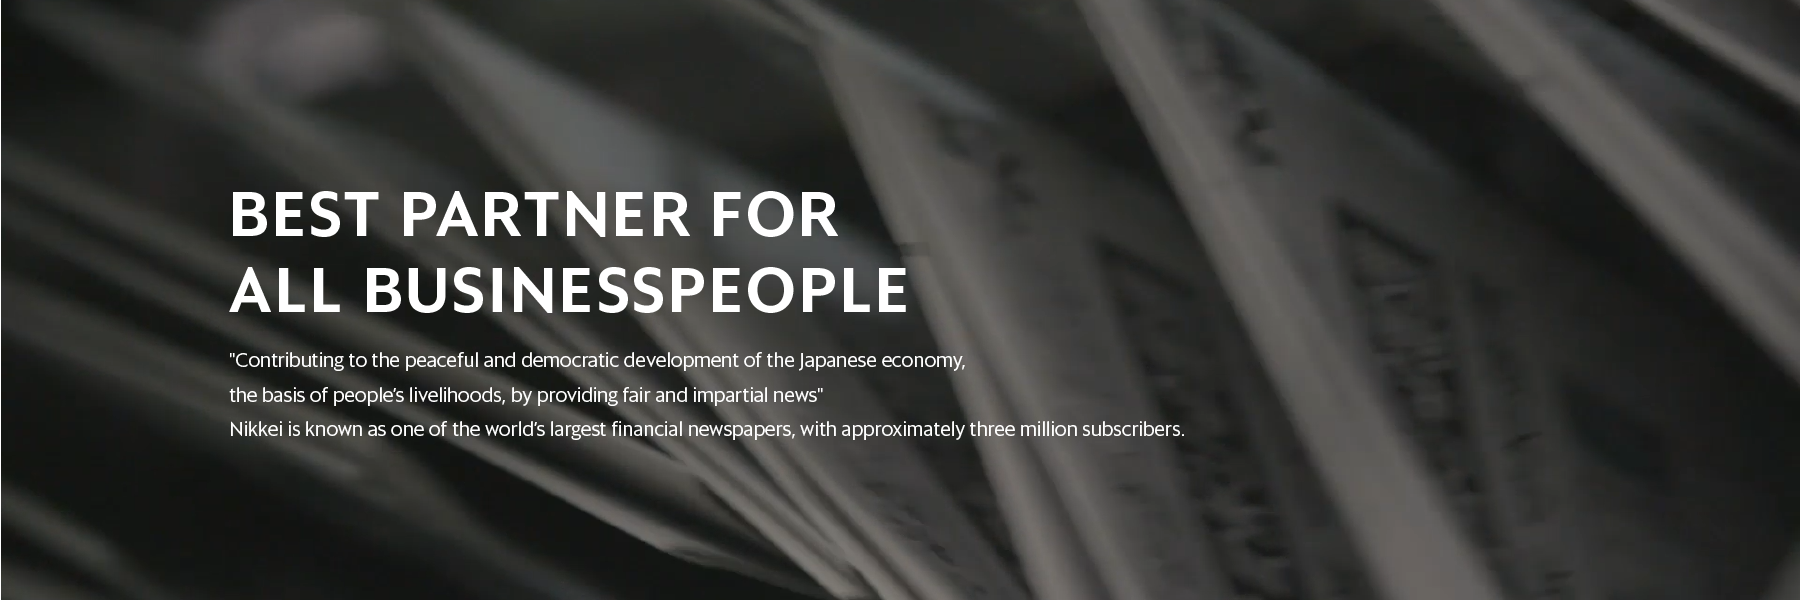 Best partner for all business people "Contributing to the peaceful and democratic development of the Japanese economy, the basis of people's livelihoods, by providing fair and impartial news" Nikkei is known as one of the world's largest financial newspapers, with approximately three million subscribers.